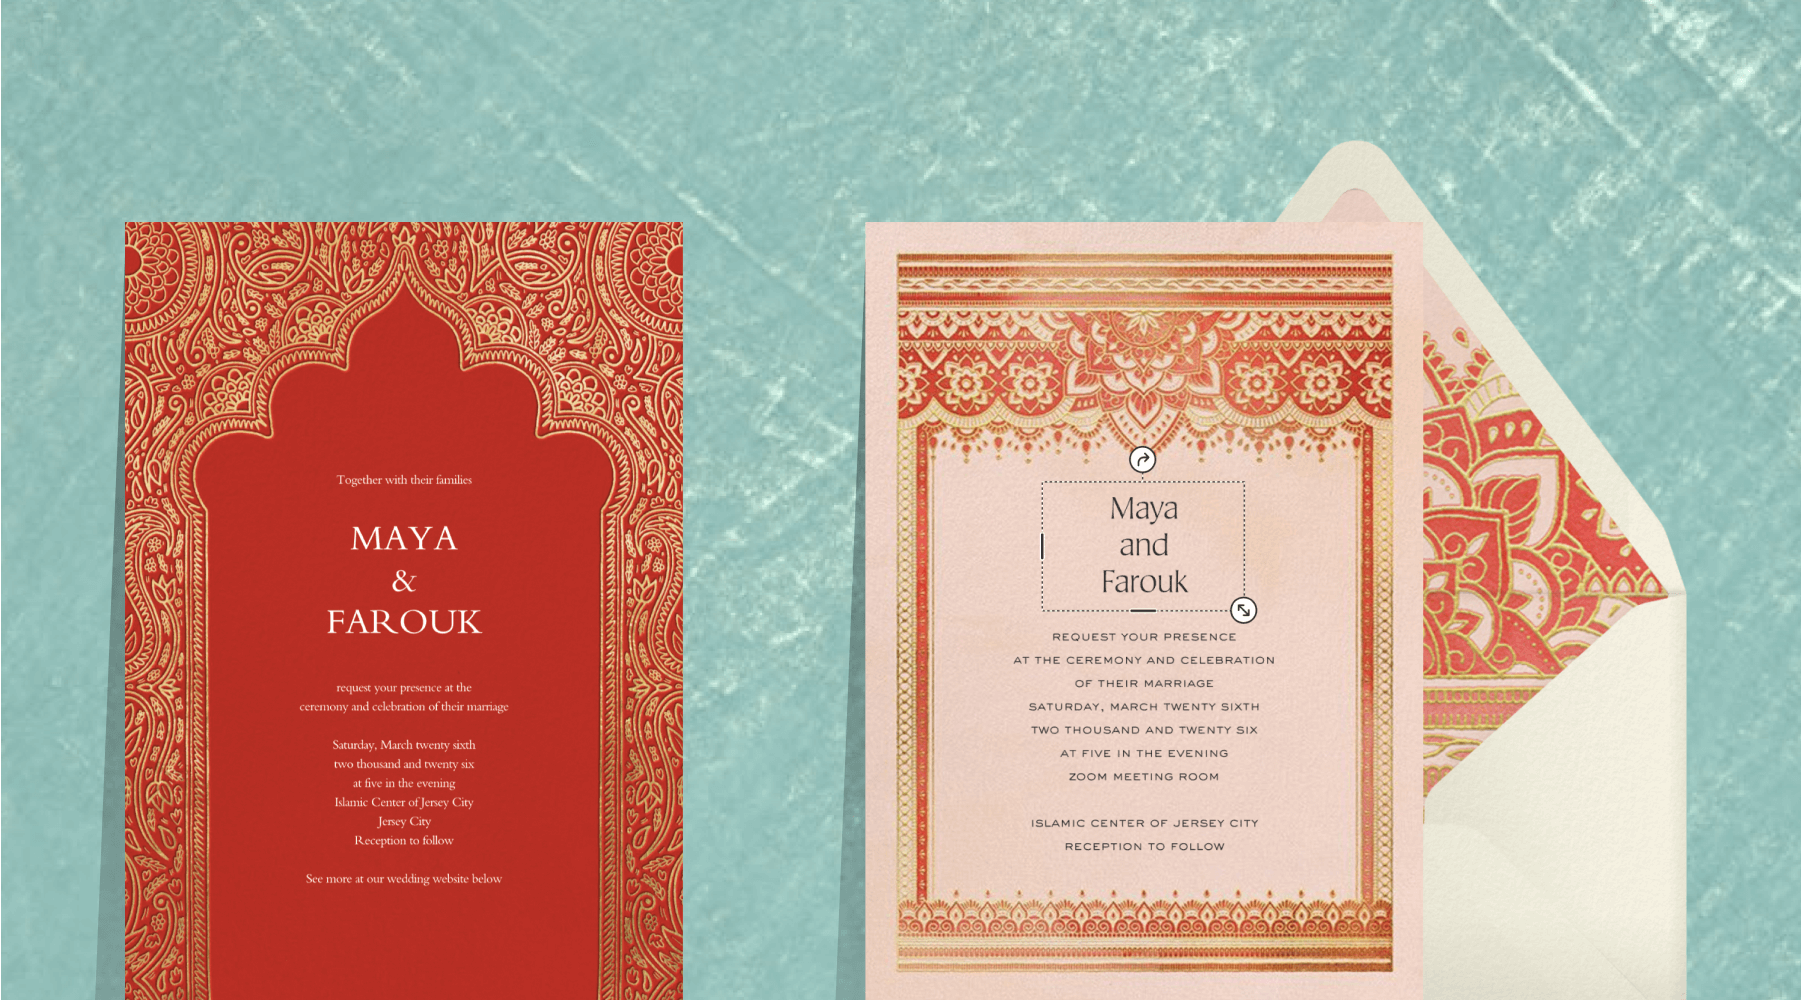 A red and gold invitation with an ornate arch at the center; an invitation with an ornate red and gold mandala-inspired border.